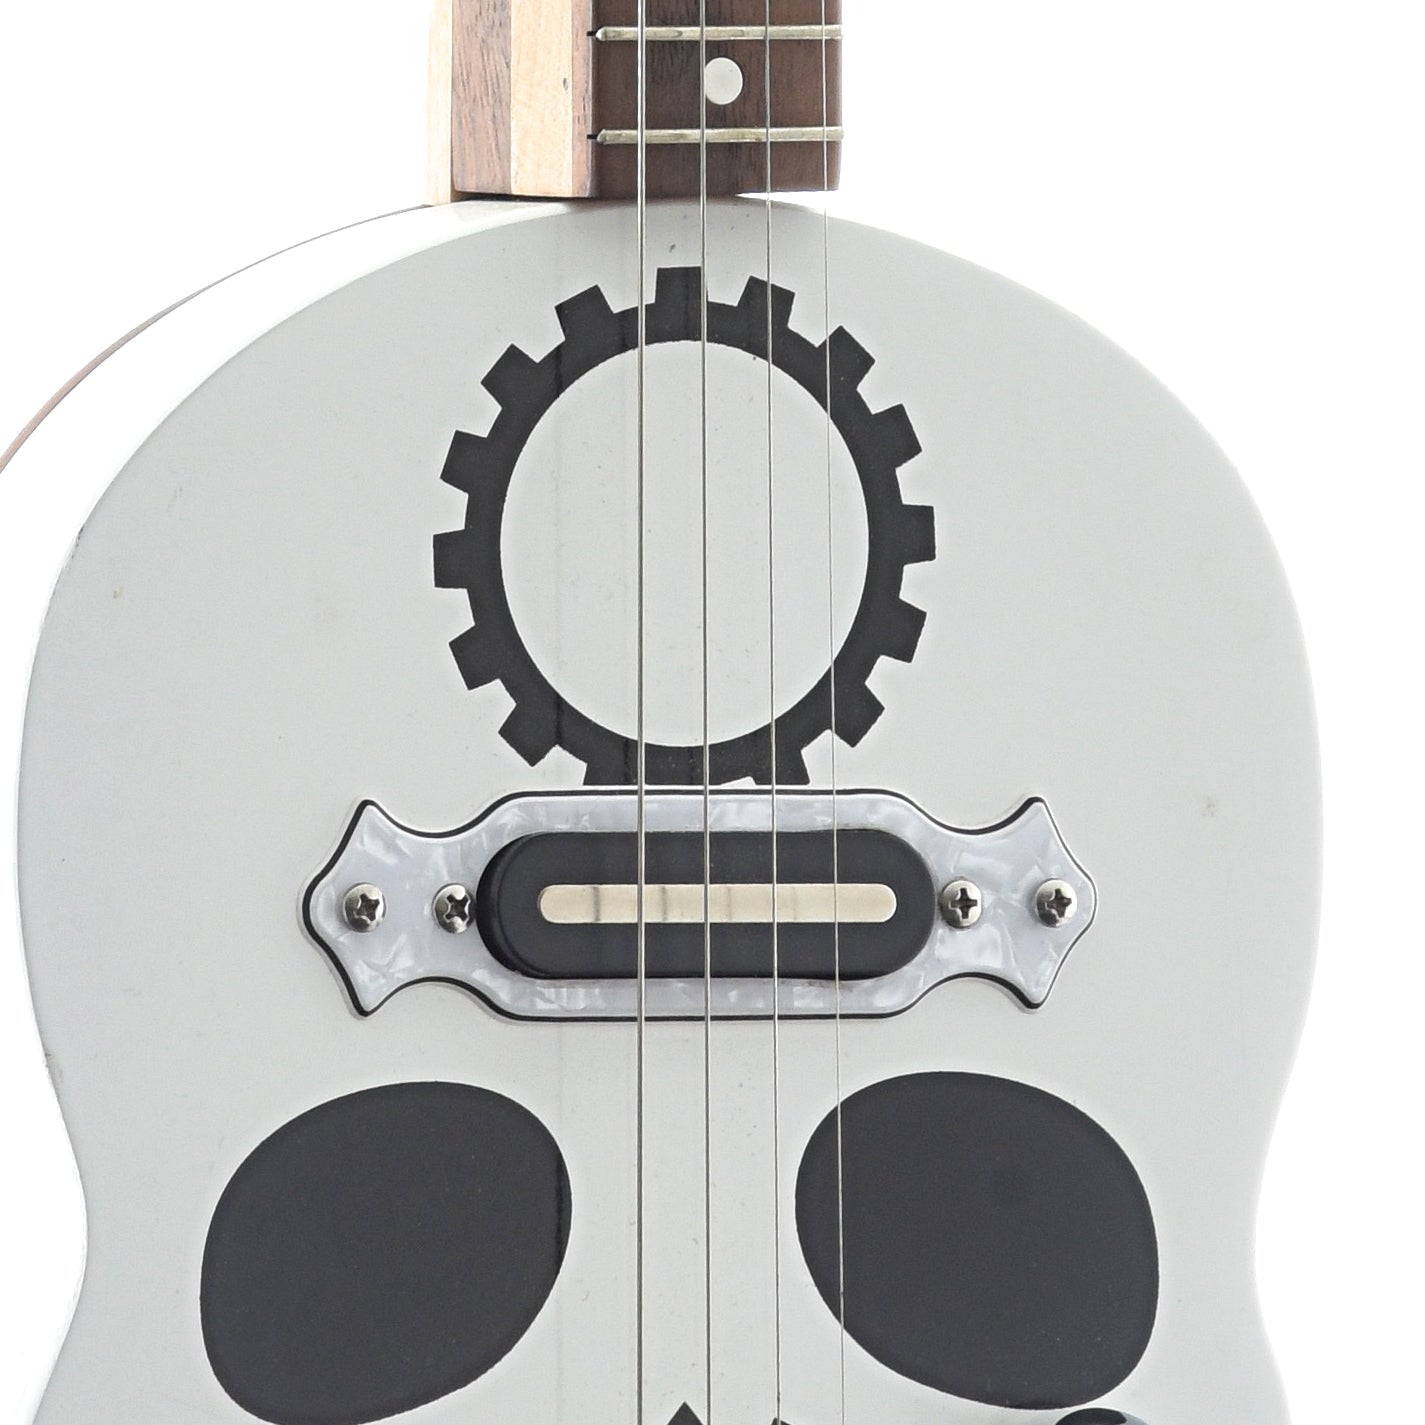 Image 4 of Get Down Guitars White Skull Cigar Box 4-String Electric Guitar - SKU# GDGSK4 : Product Type Solid Body Electric Guitars : Elderly Instruments